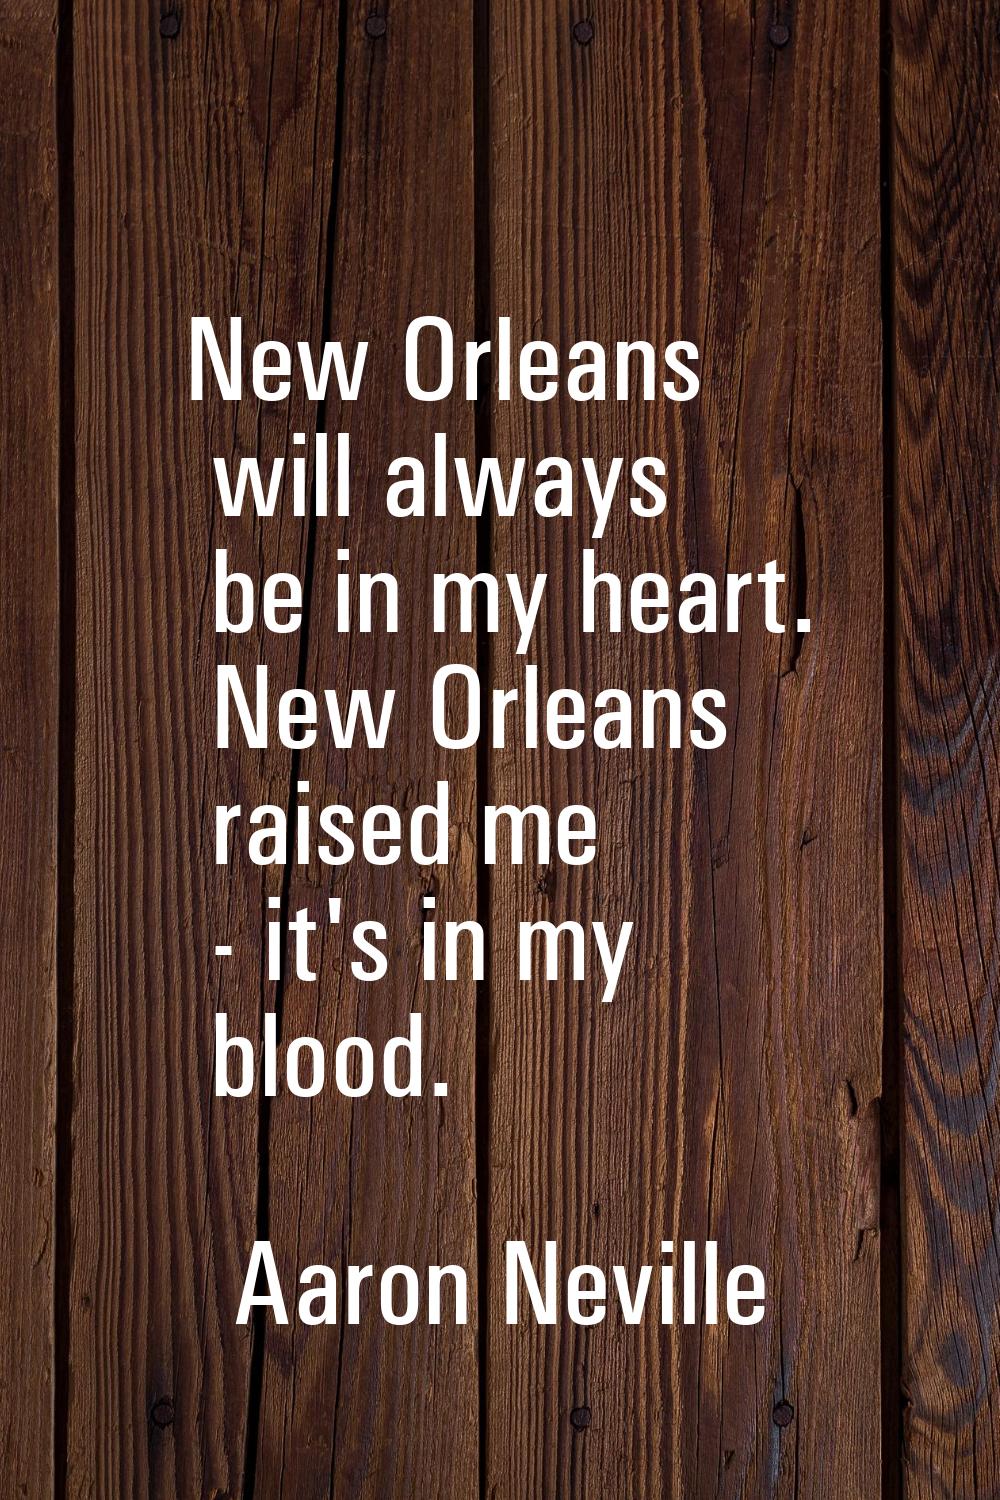 New Orleans will always be in my heart. New Orleans raised me - it's in my blood.